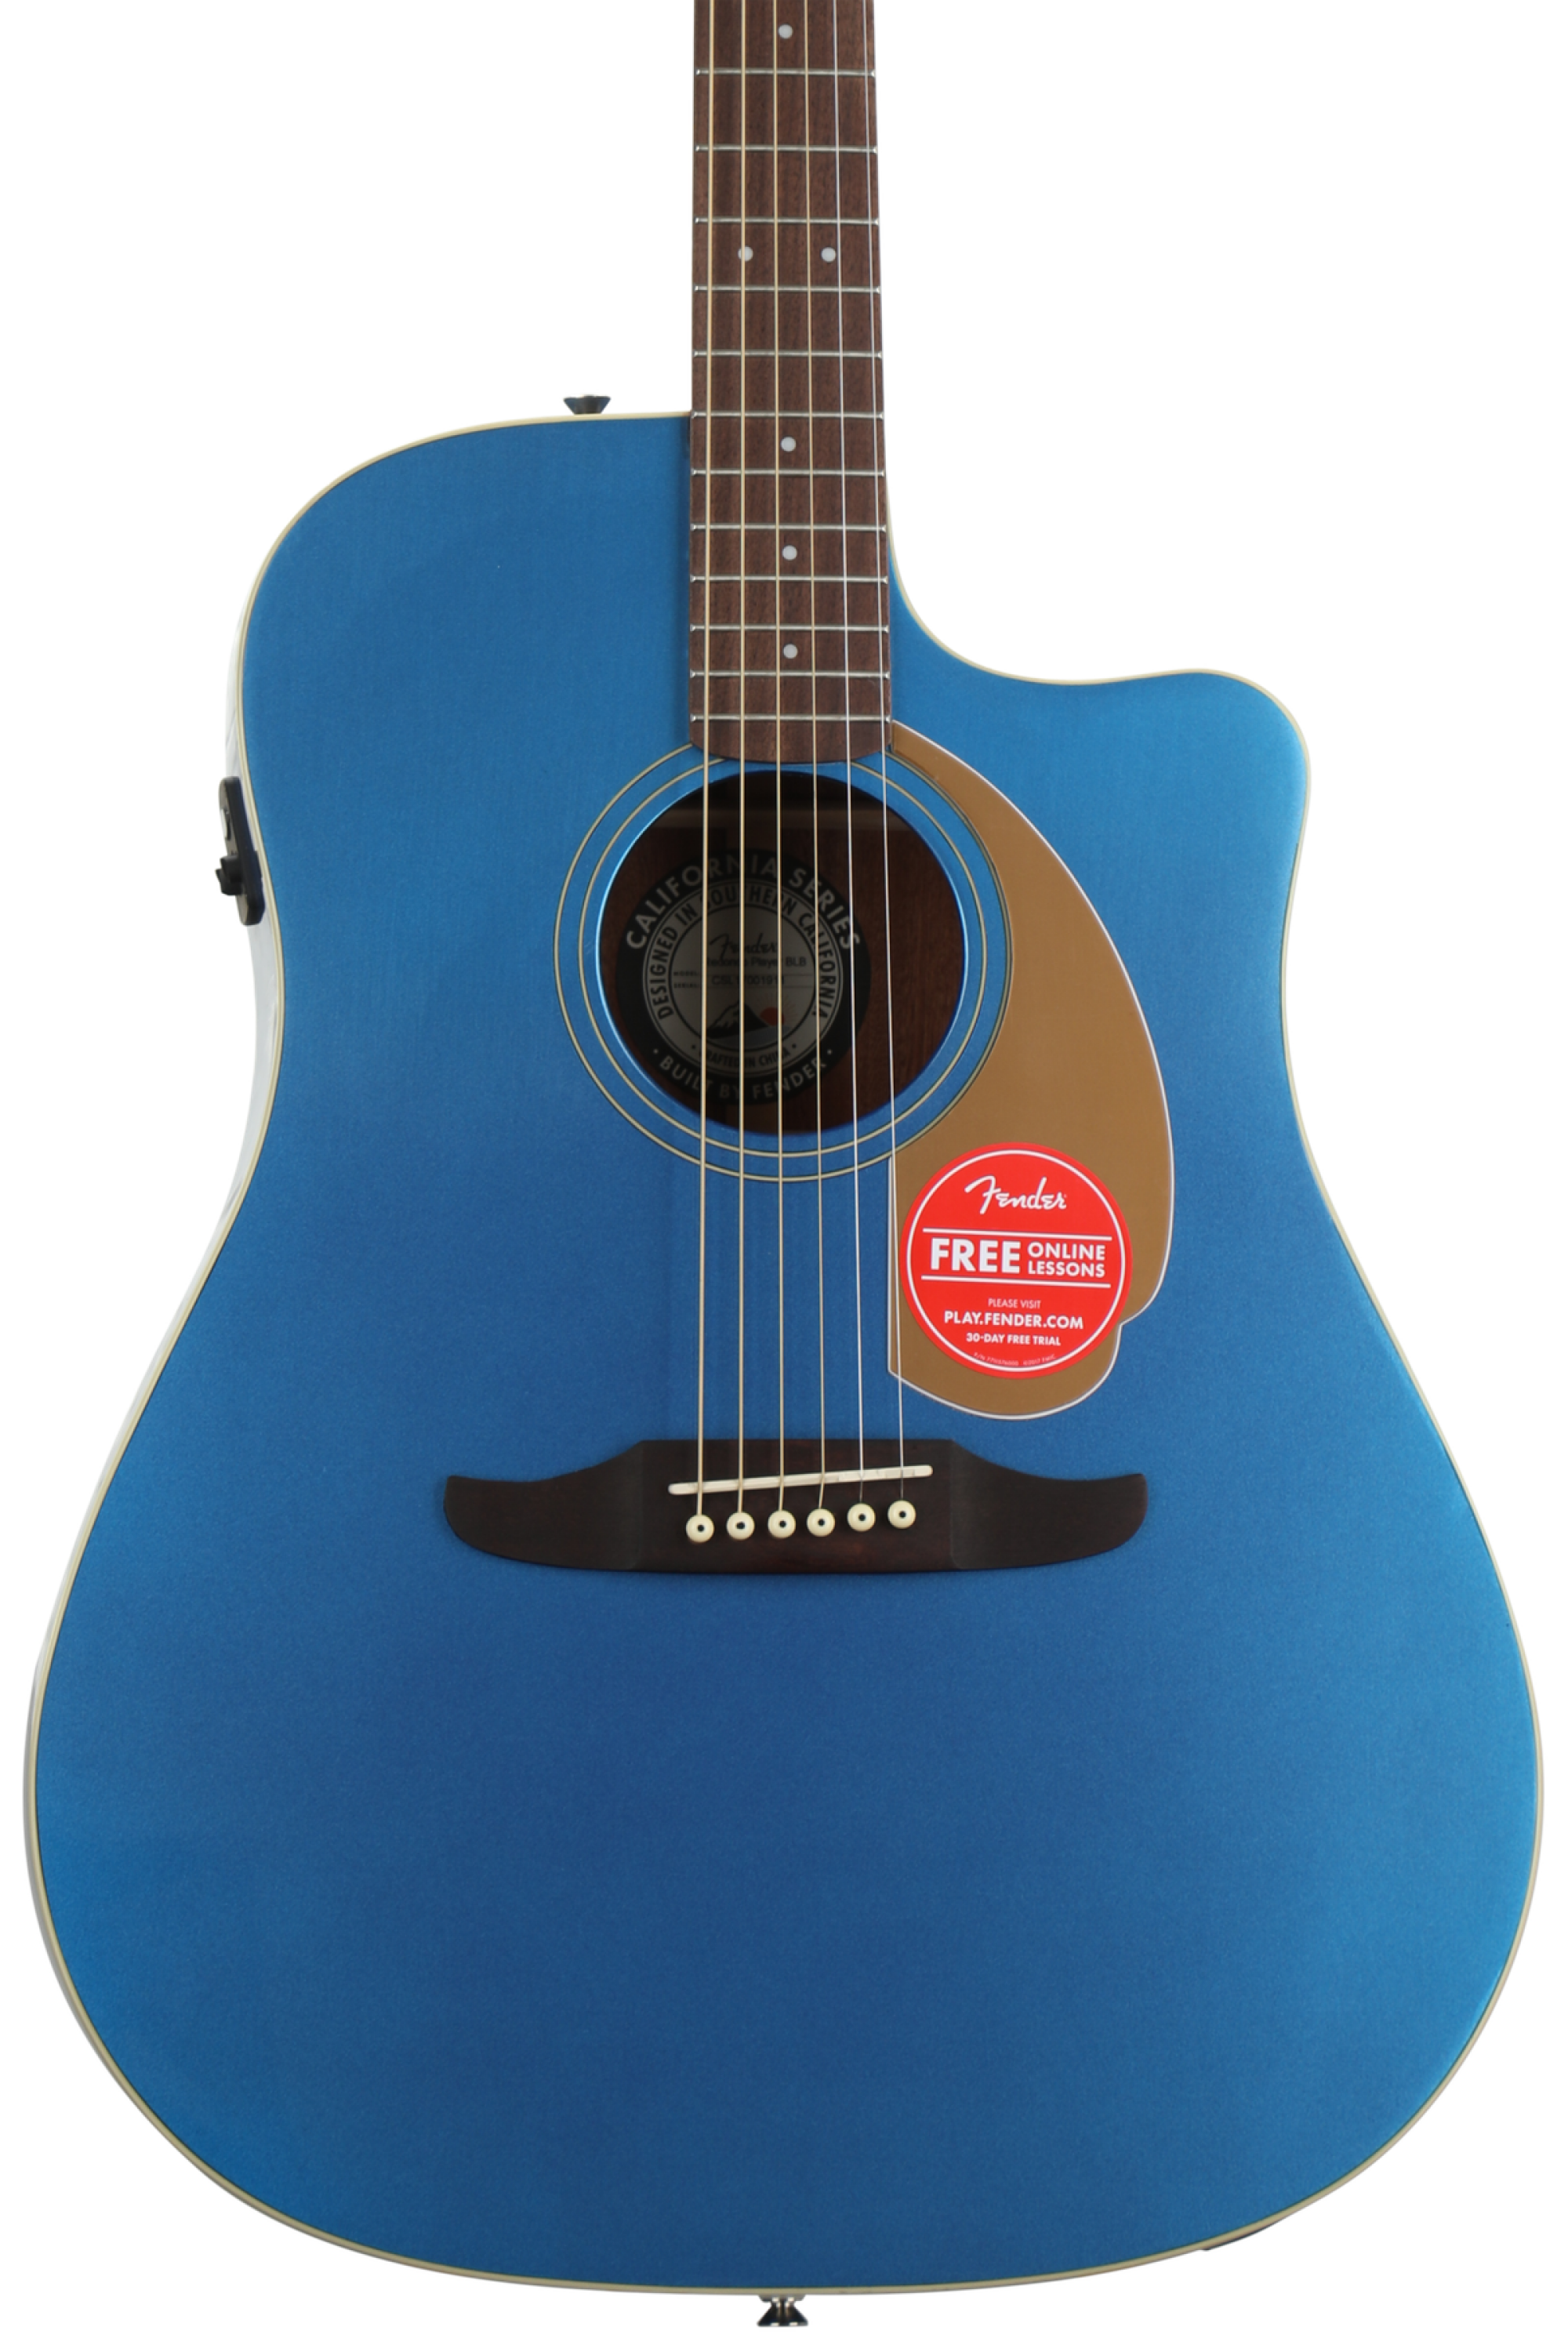 Blue　Player　Acoustic-electric　Fender　Belmont　Sweetwater　Redondo　Guitar